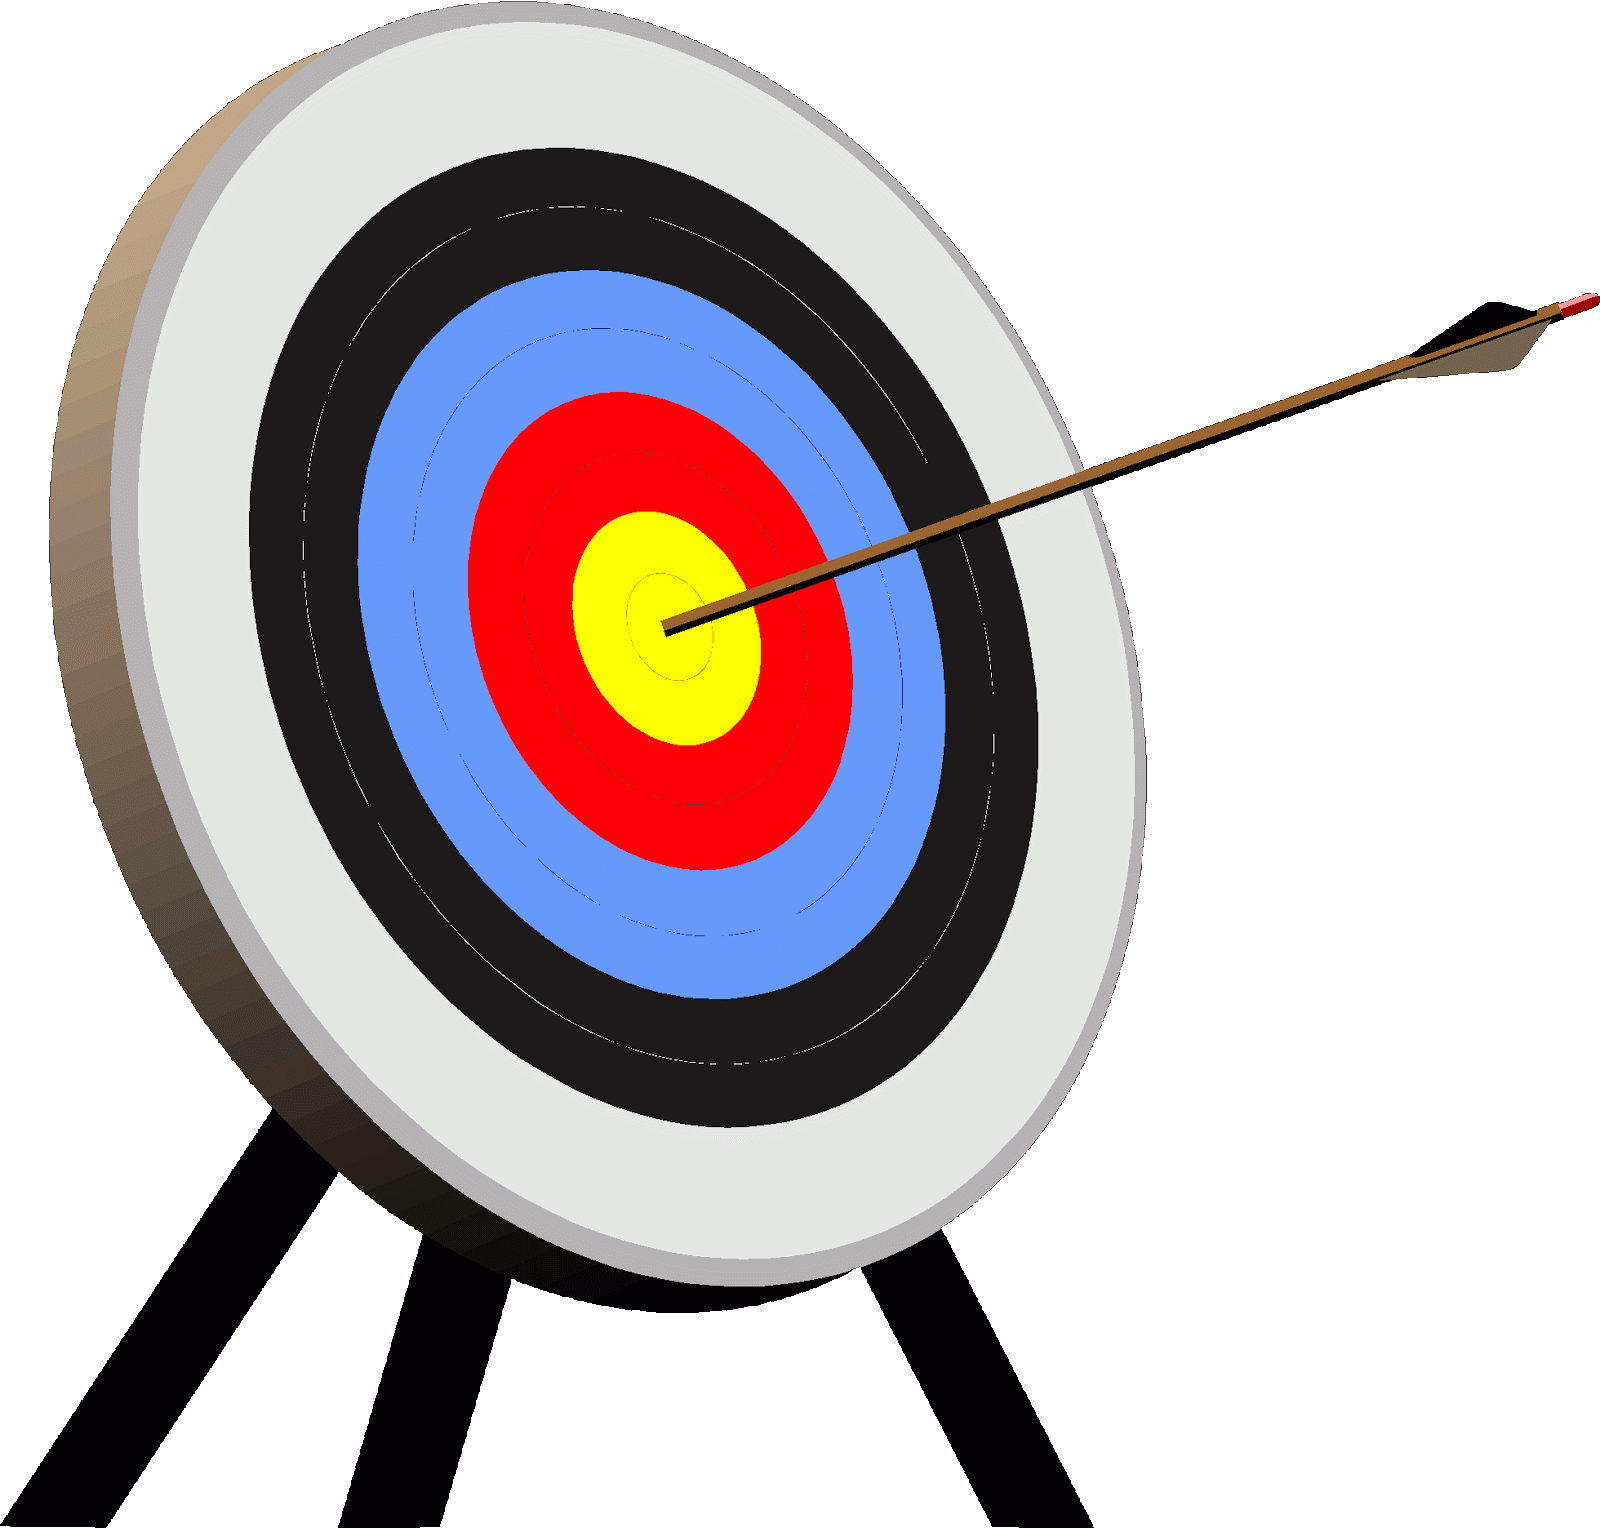 Live stream archery with. Olympic clipart olympic event